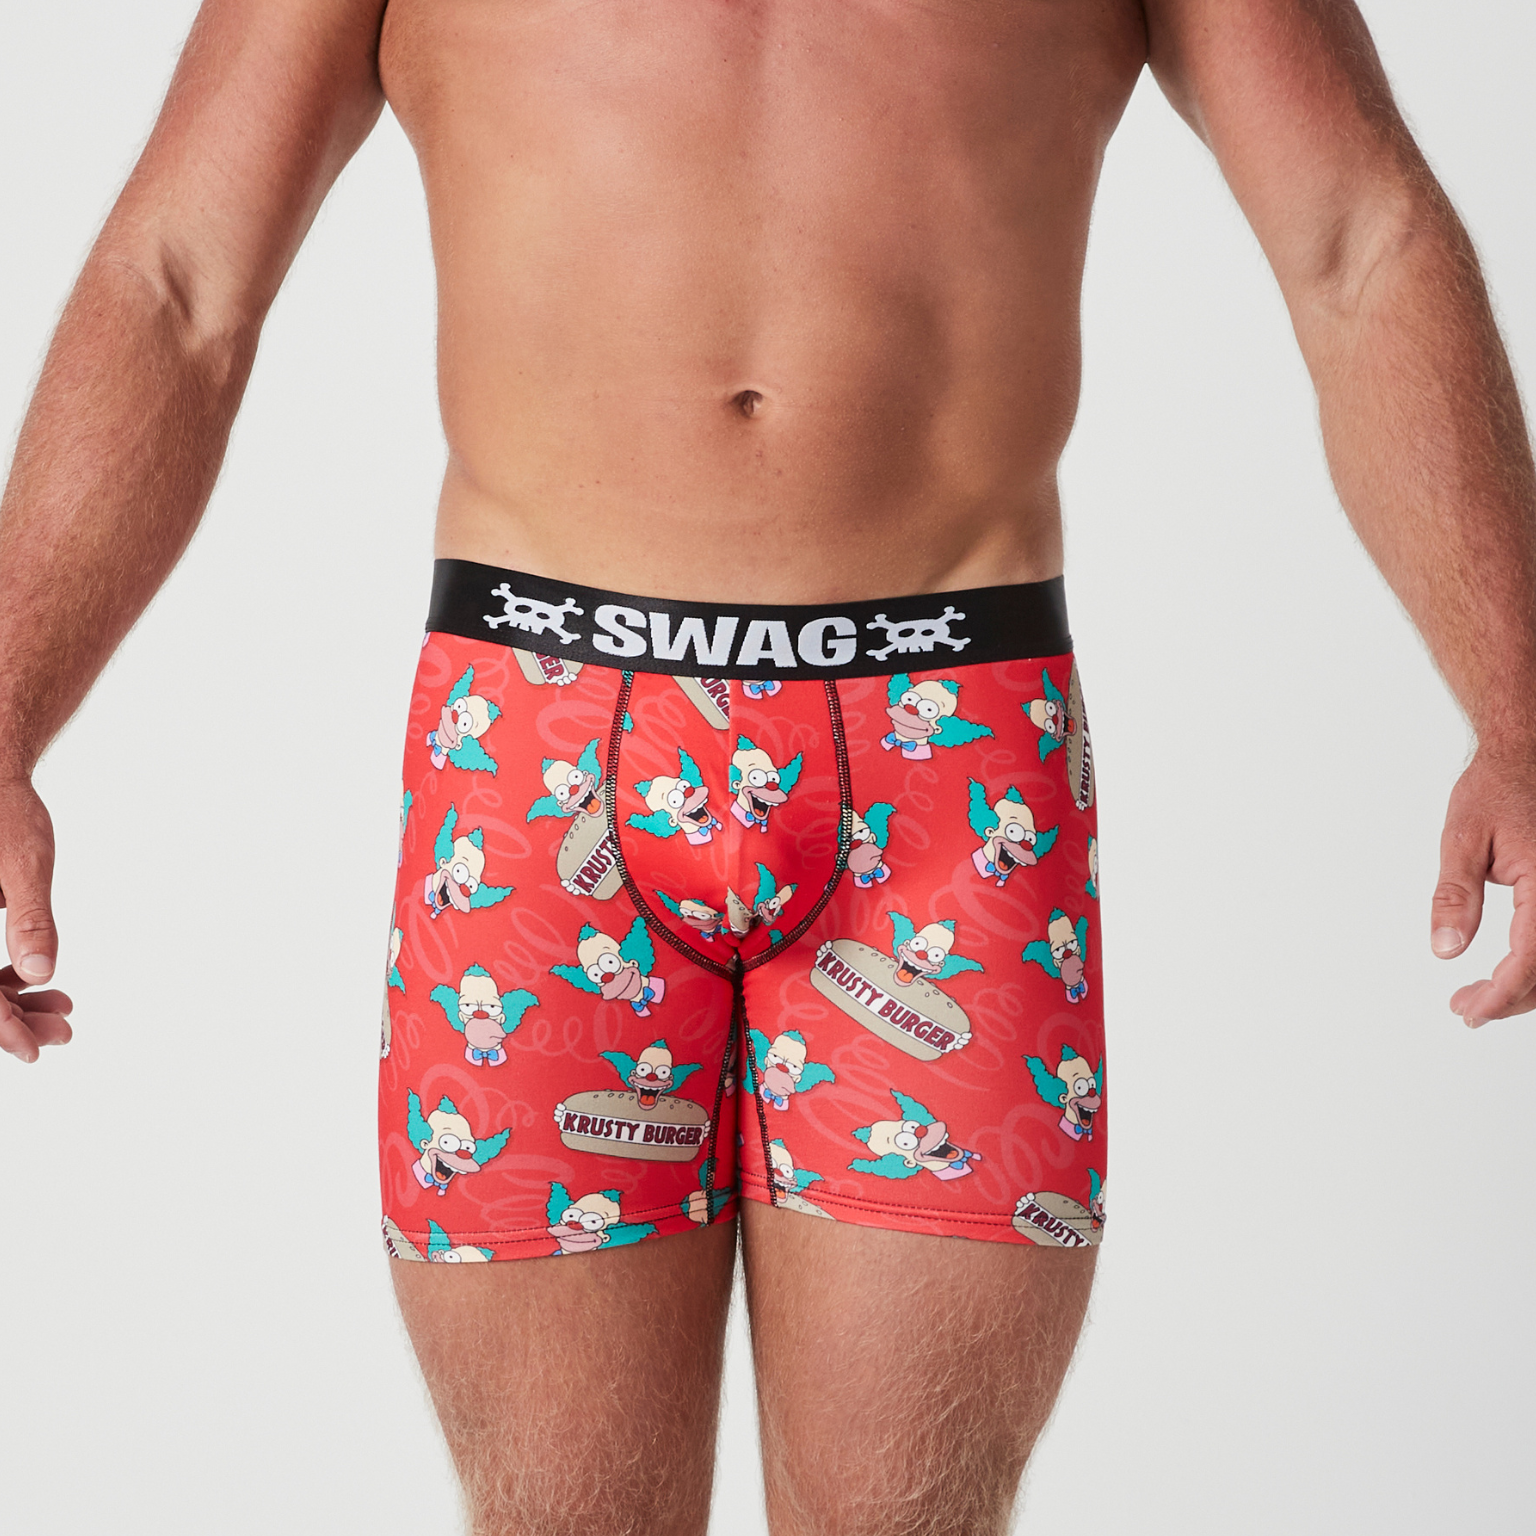 Men's Boxers: Fun & Stylish Boxer Briefs Collection by Swag